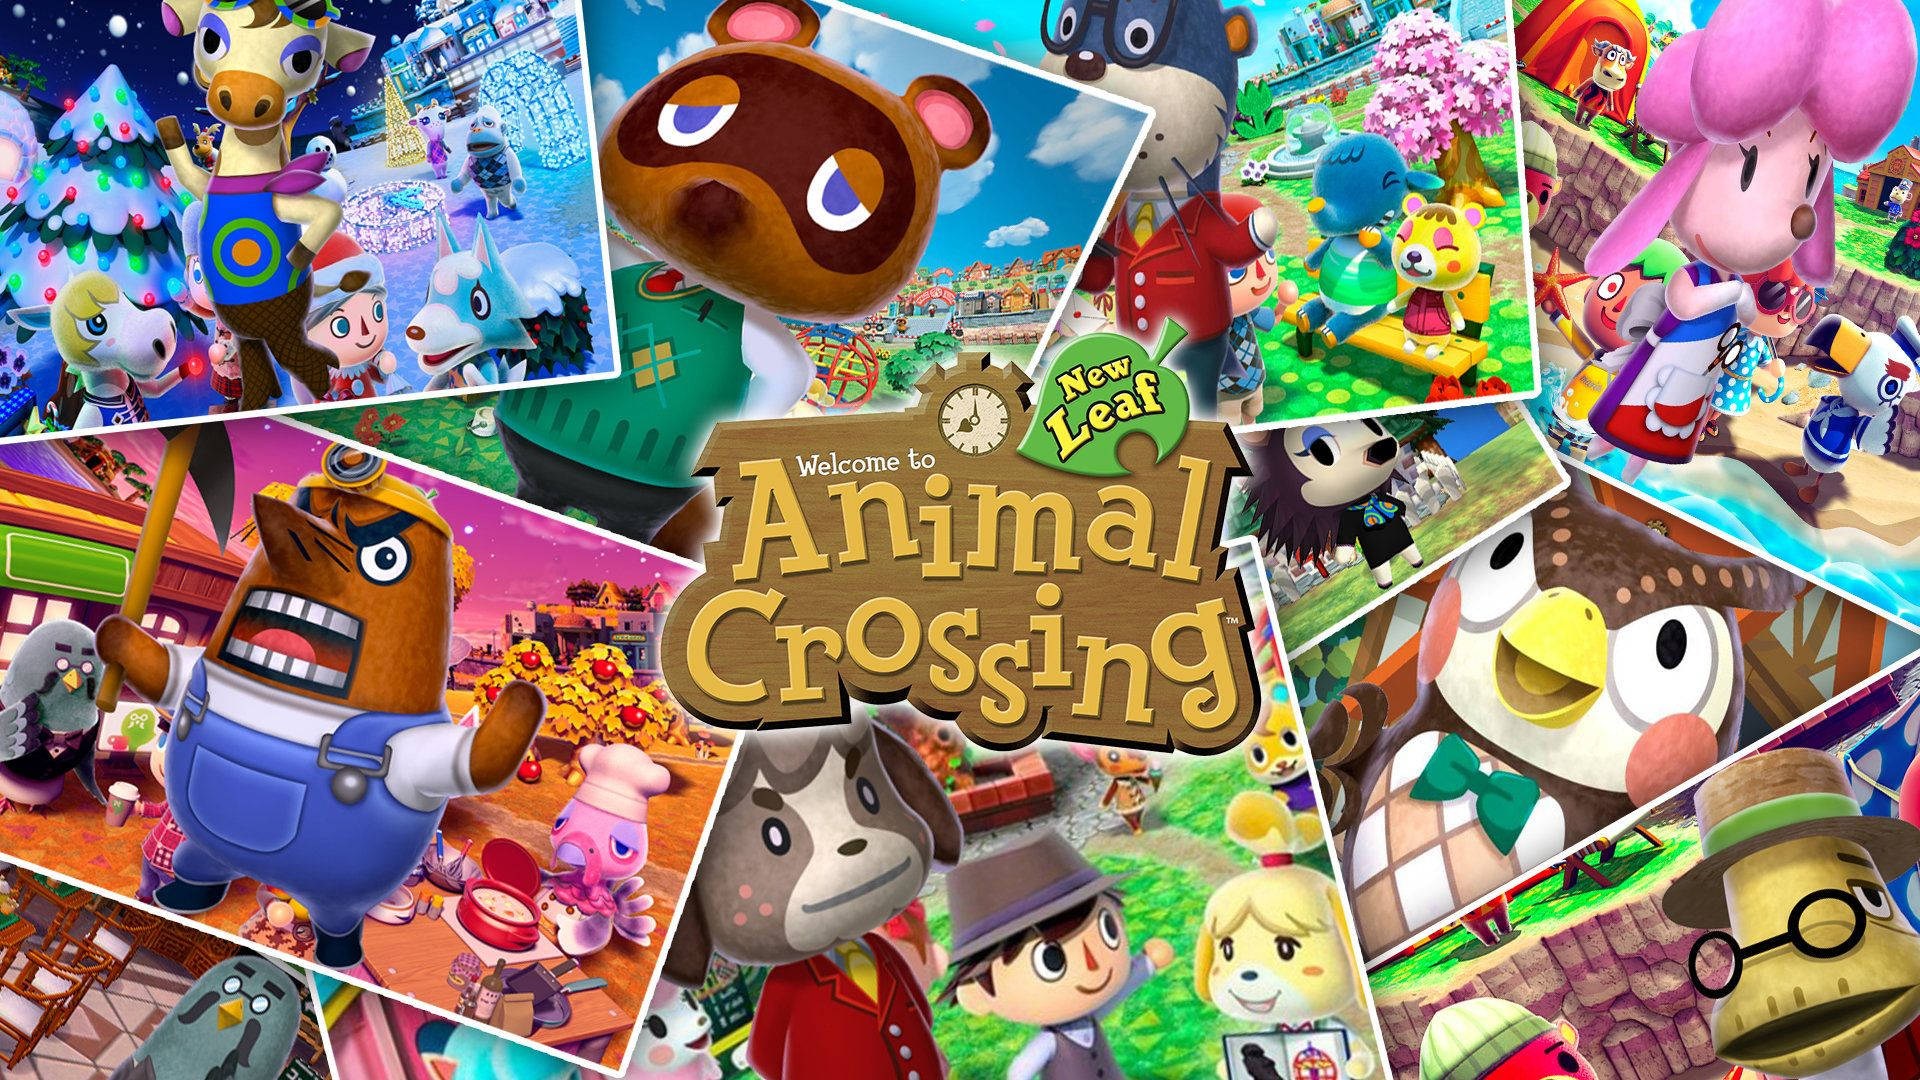 Cool Hd Animal Crossing Poster Background